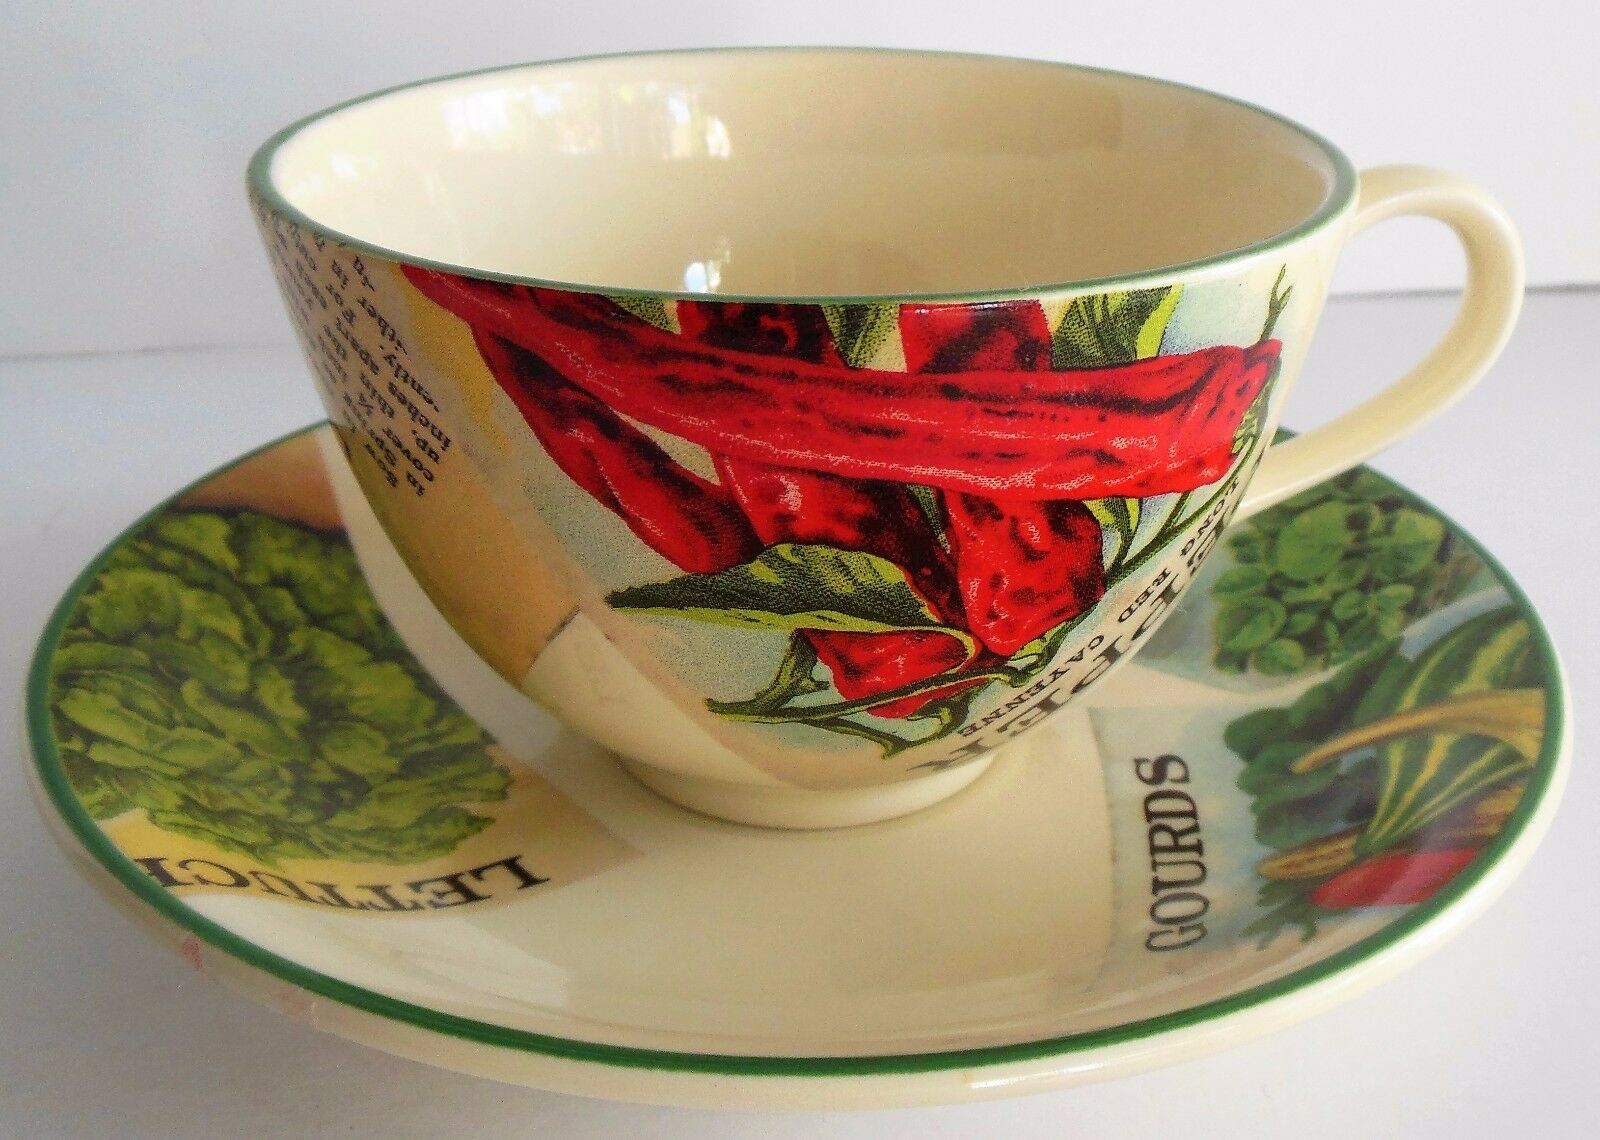 Seed Packets Poole Pottery Cup & Saucer England Coffee Breakfast Tea Cup